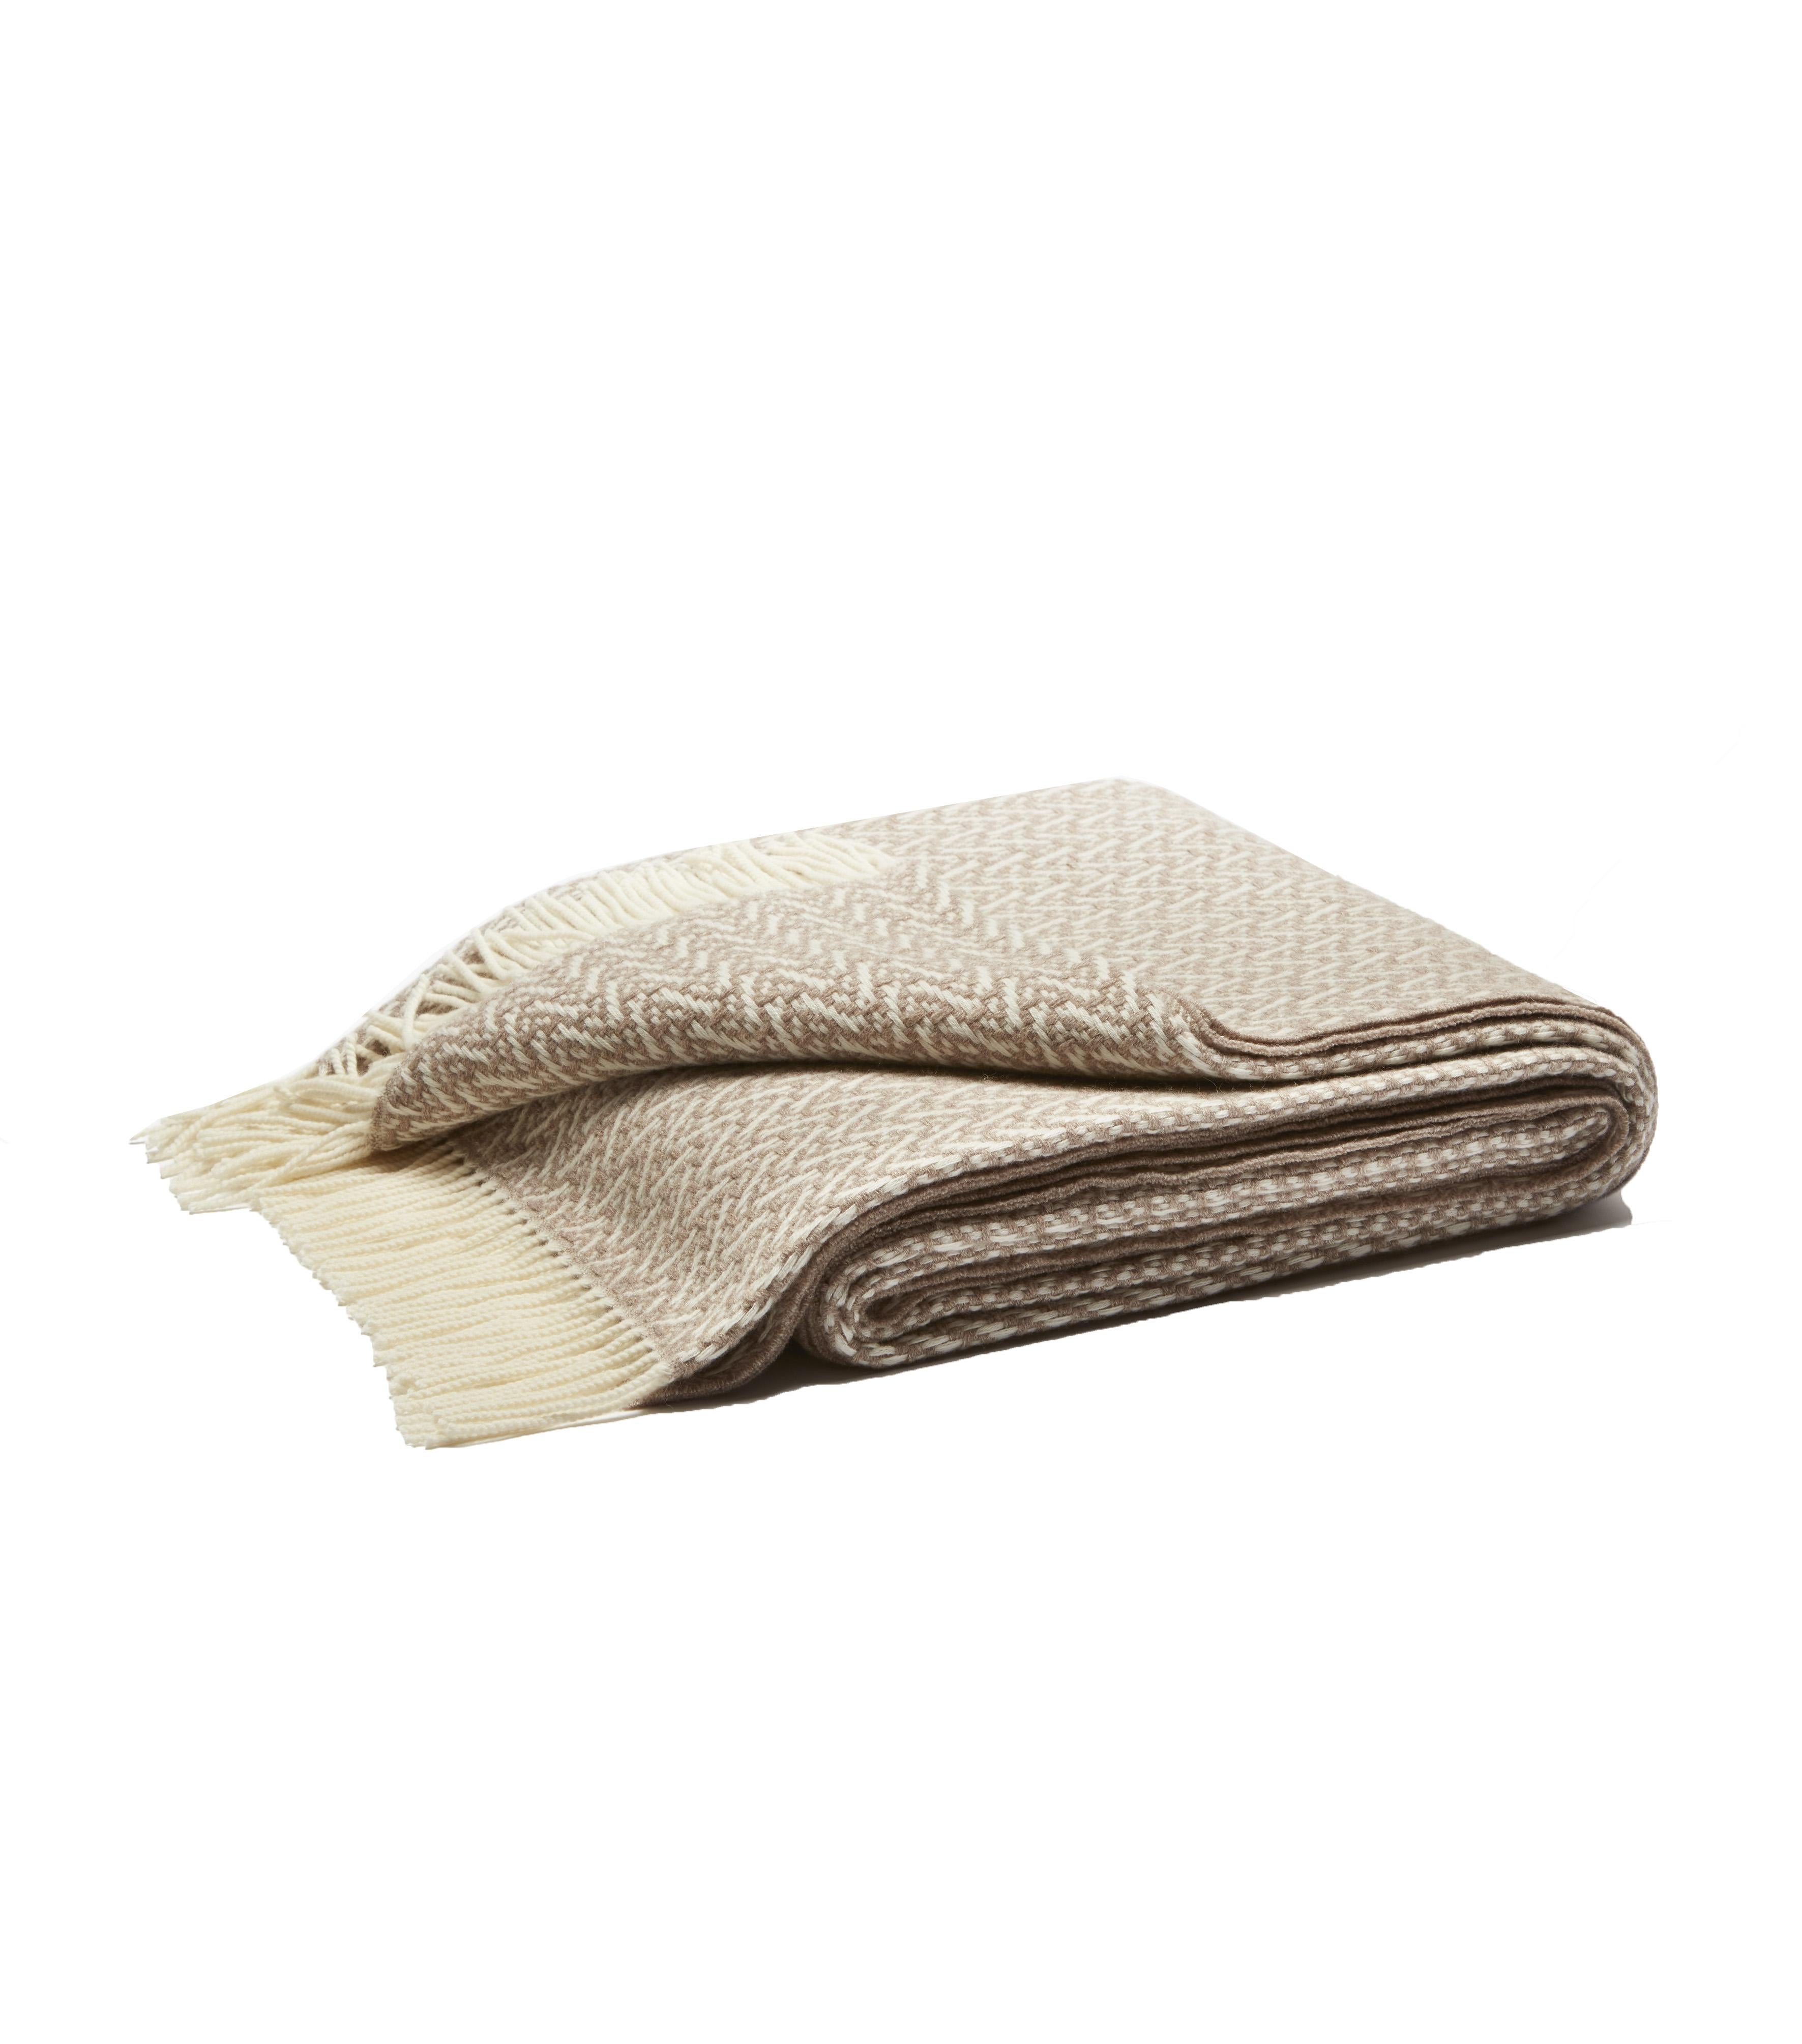 LO Decor Throws Collections showcase a contemporary take on a traditional design for a touch of timeless elegance. These generously sized Cashmere Throws give an aspirational edge to any living space. Stylish in its simplicity, this blanket is